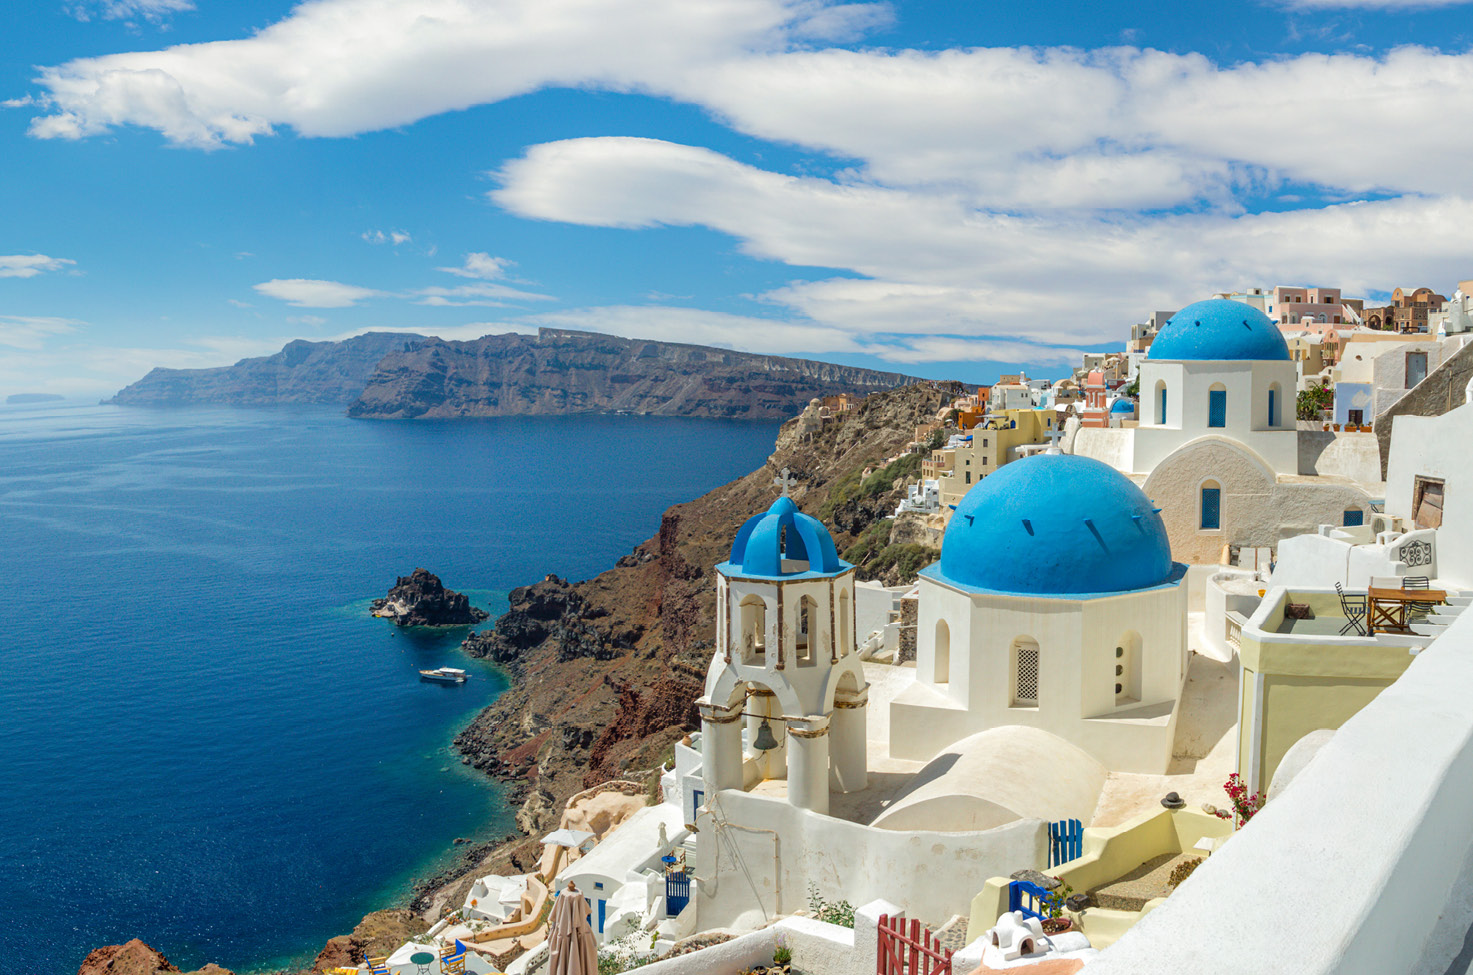 Hillside view of blue and white buildings in Santorini Greece